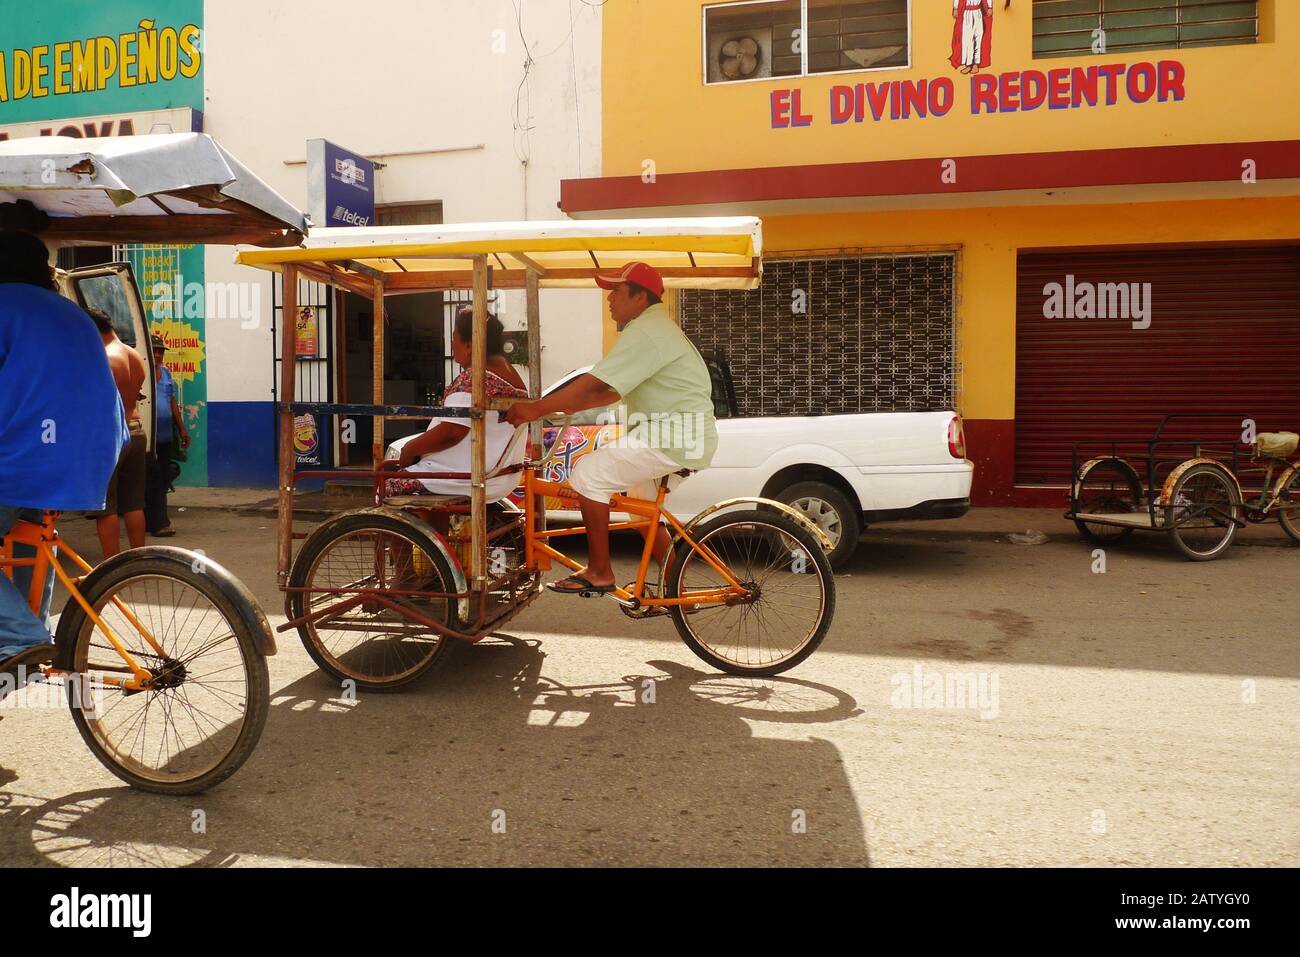 Pedicab (bicycle taxi) on a colonial street in Hunucma, Yucatan, Mexico.  Papel Picado flags fly overhead. Stock Photo